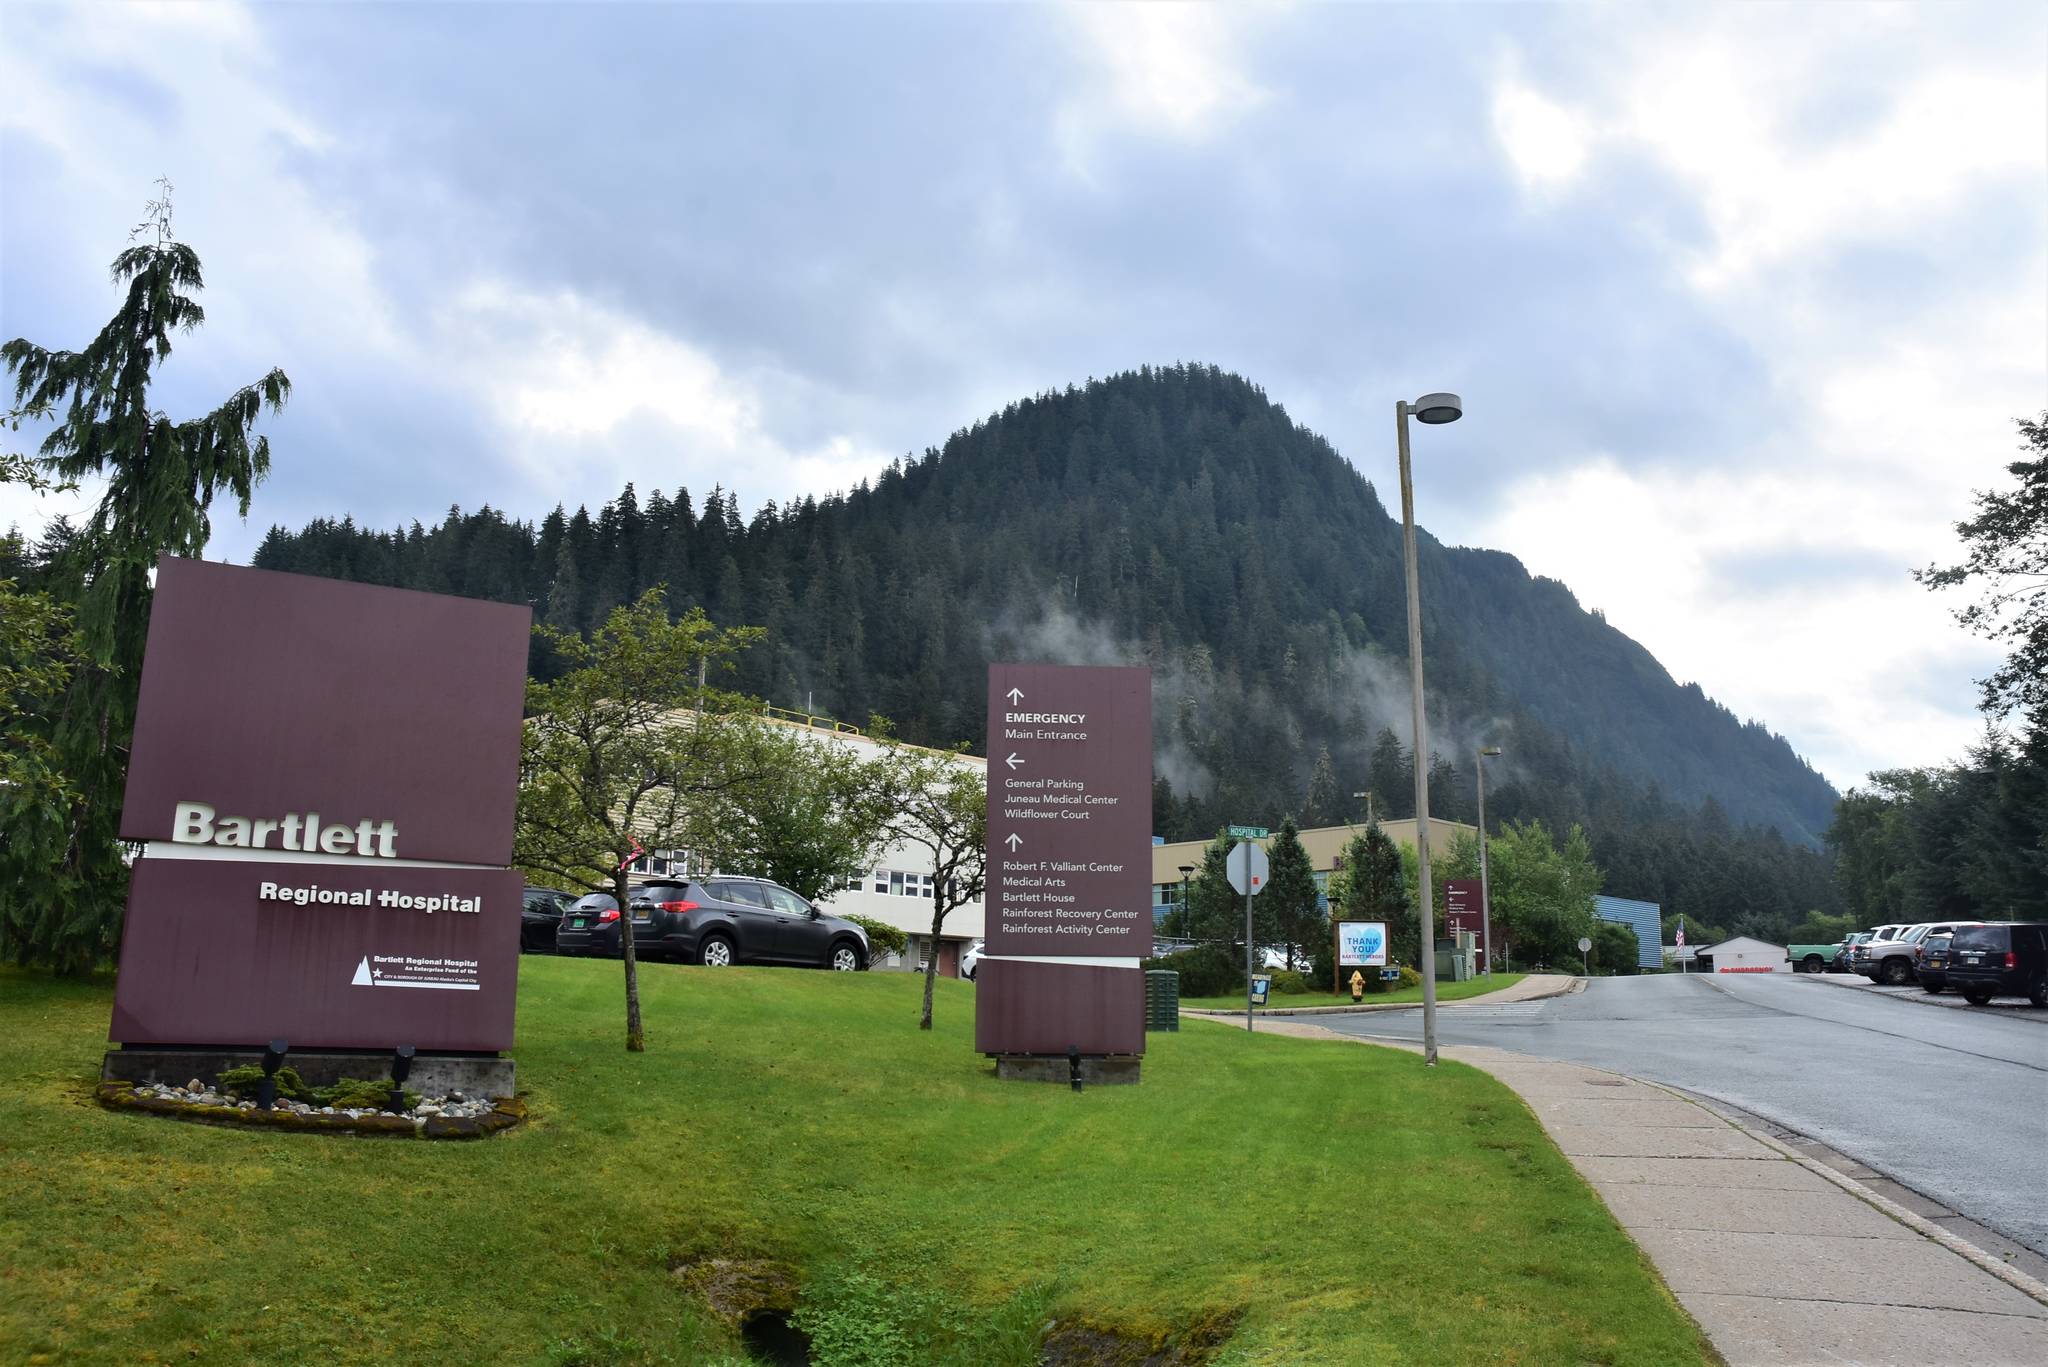 Bartlett Regional Hospital on Thursday, Aug. 27, 2020. The City and Borough of Juneau is awaiting delivery of a testing machine that will allow for advanced coronavirus tests to be processed locally. Due to high demand for the machines, the earliest the city expects to receive the machine is early December, but city officials say that’s being optimistic. (Peter Segall / Juneau Empire)